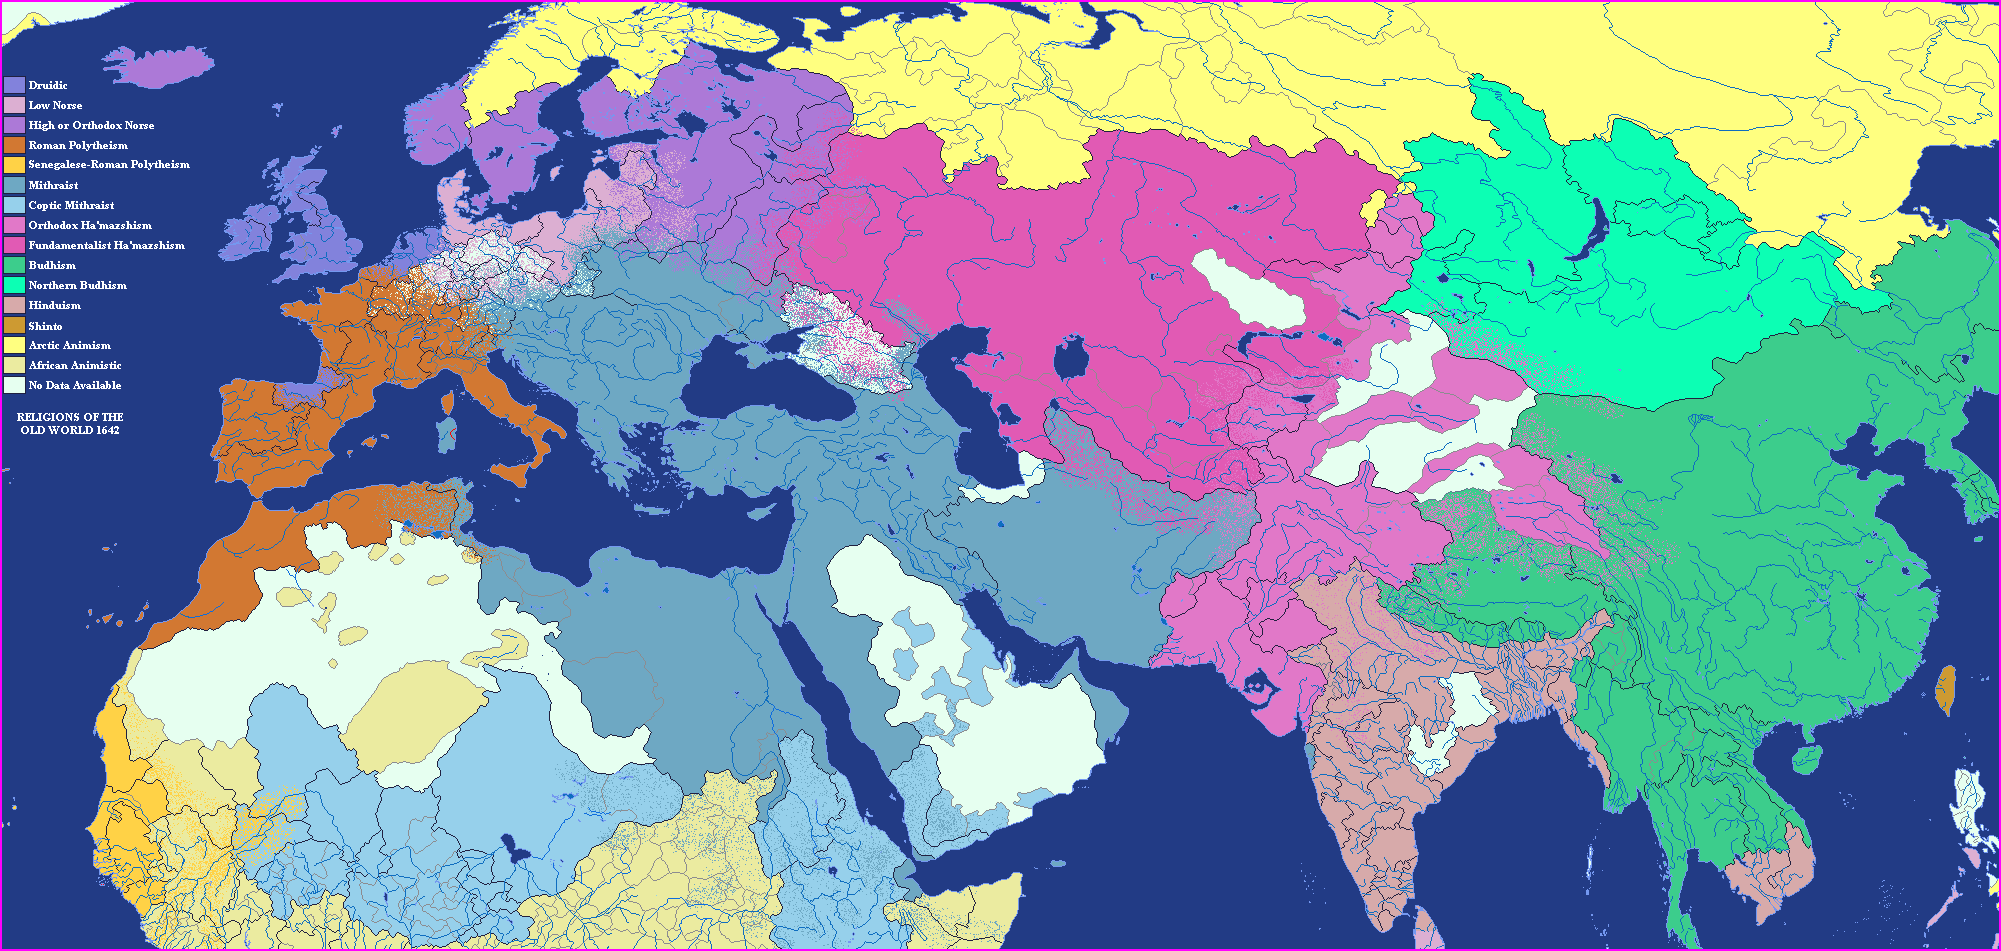 Religions of the old world 1641.PNG